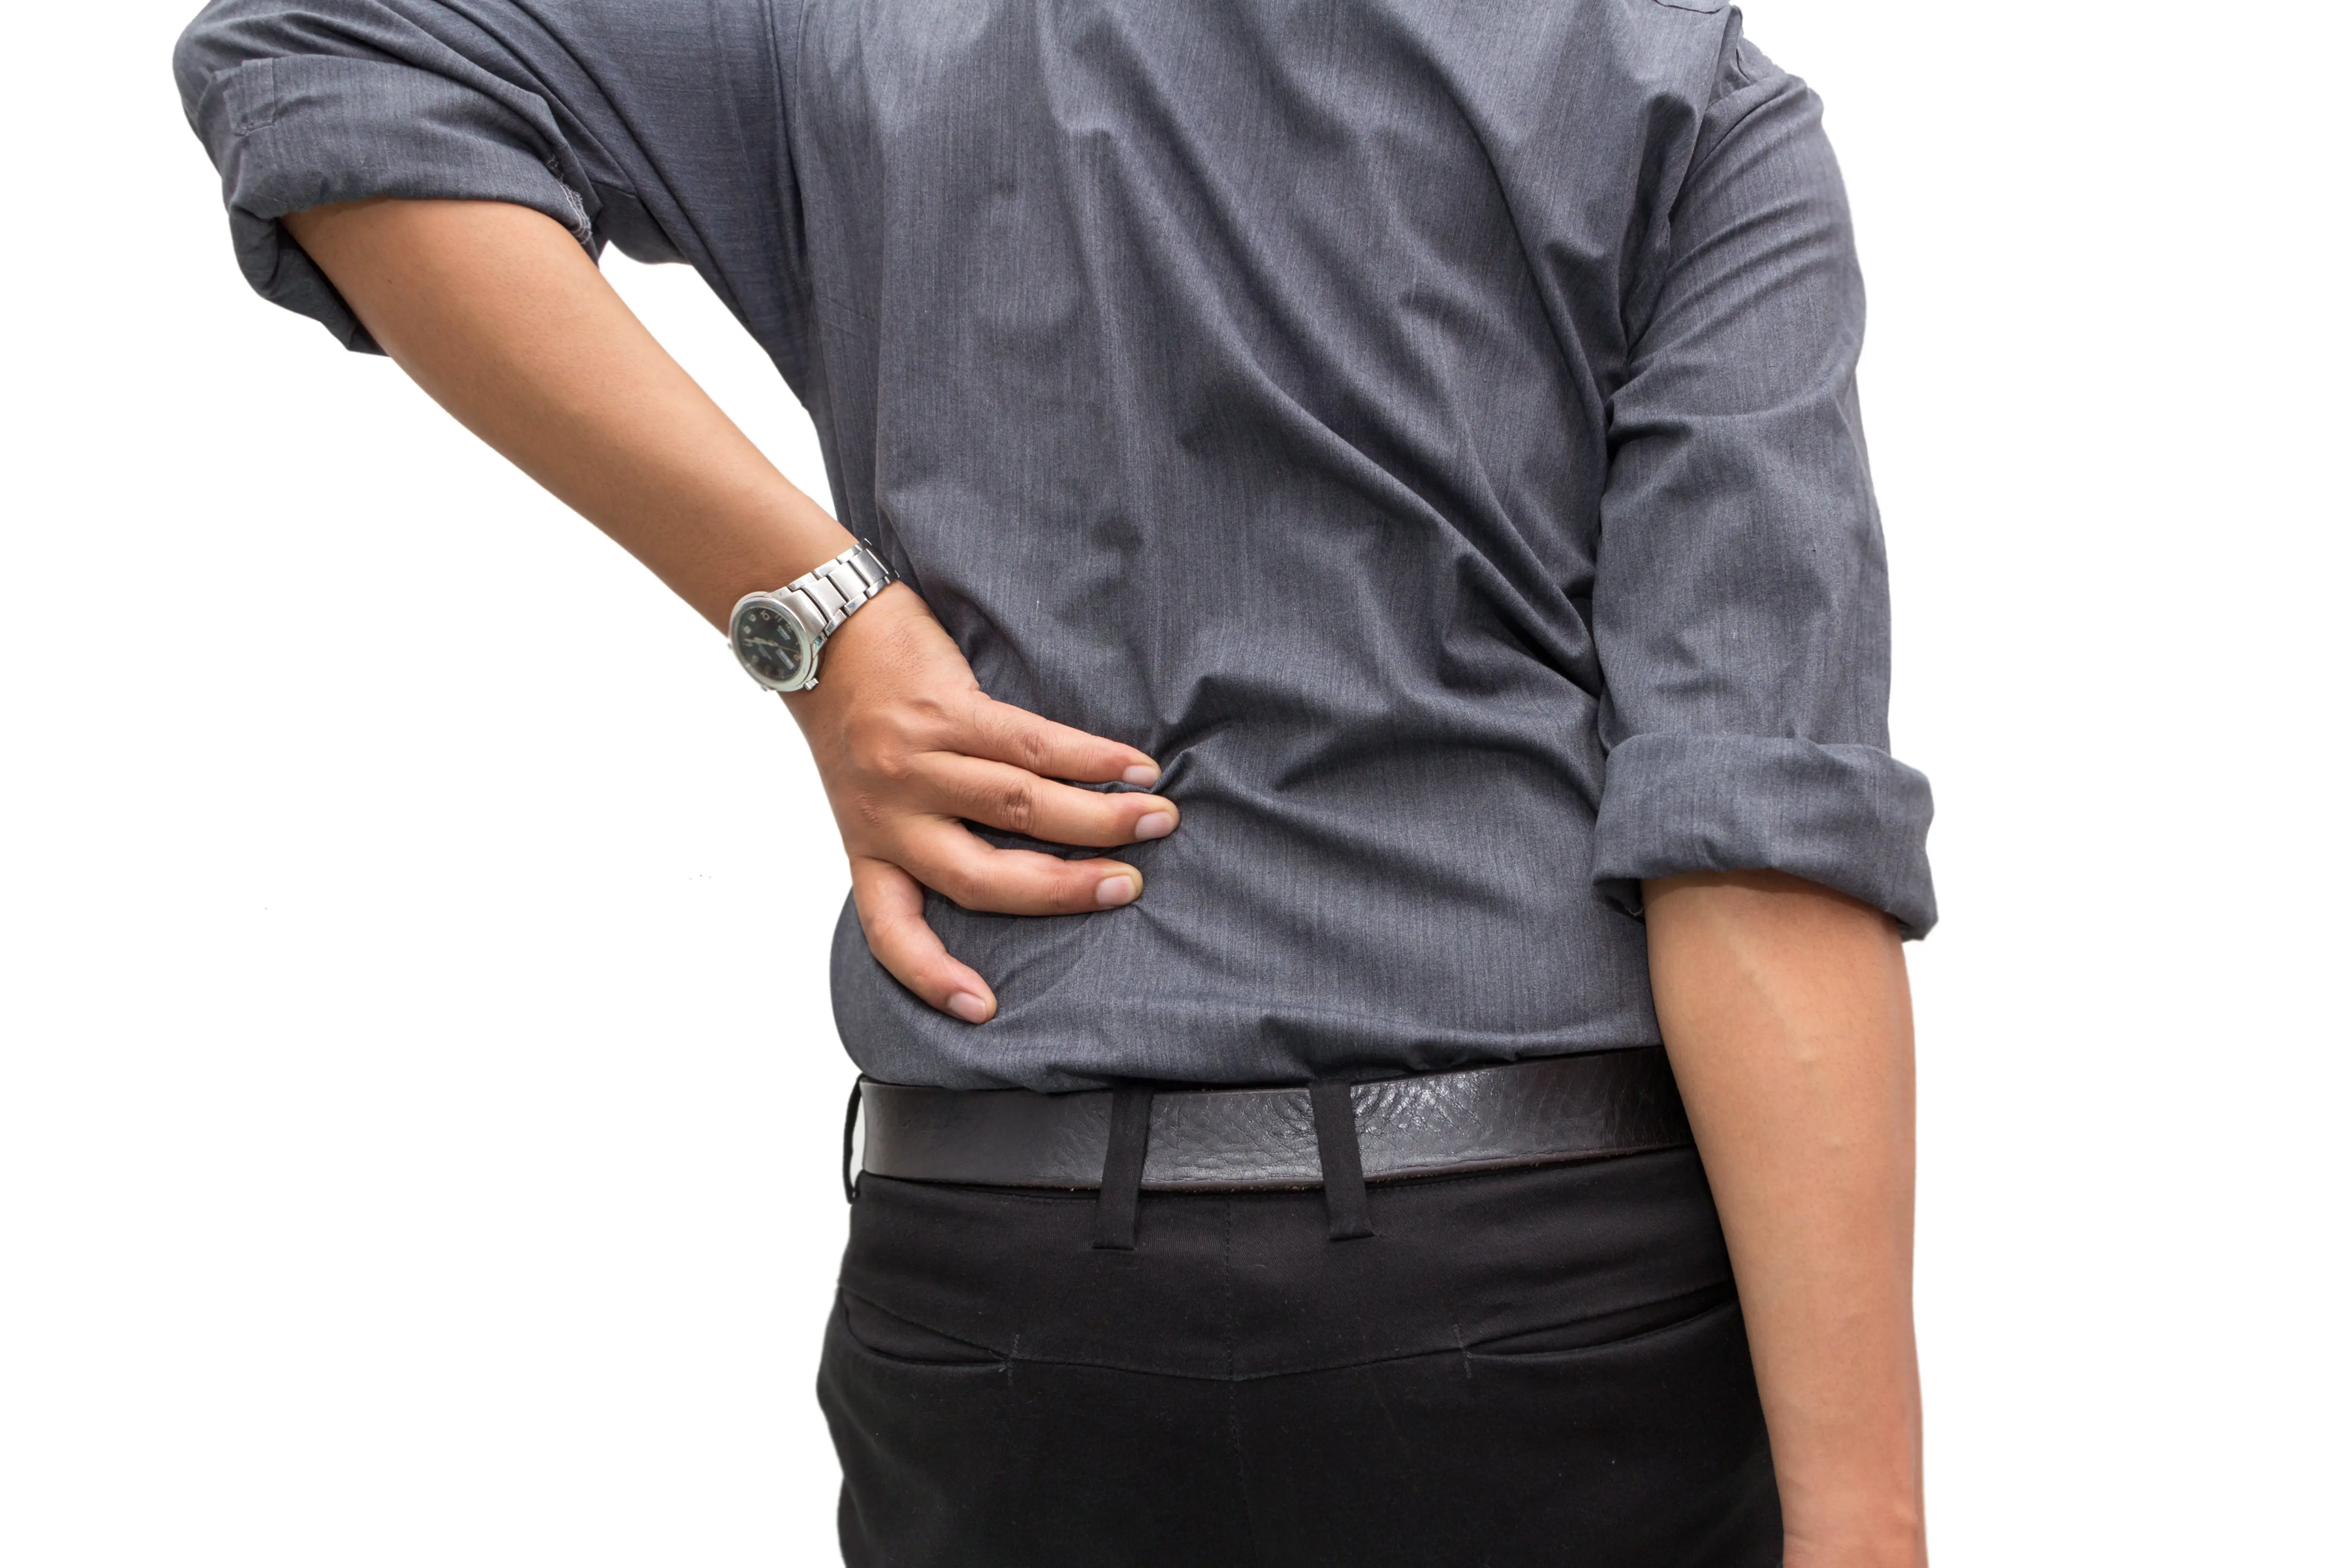 Man holding back experienced a herniated disc